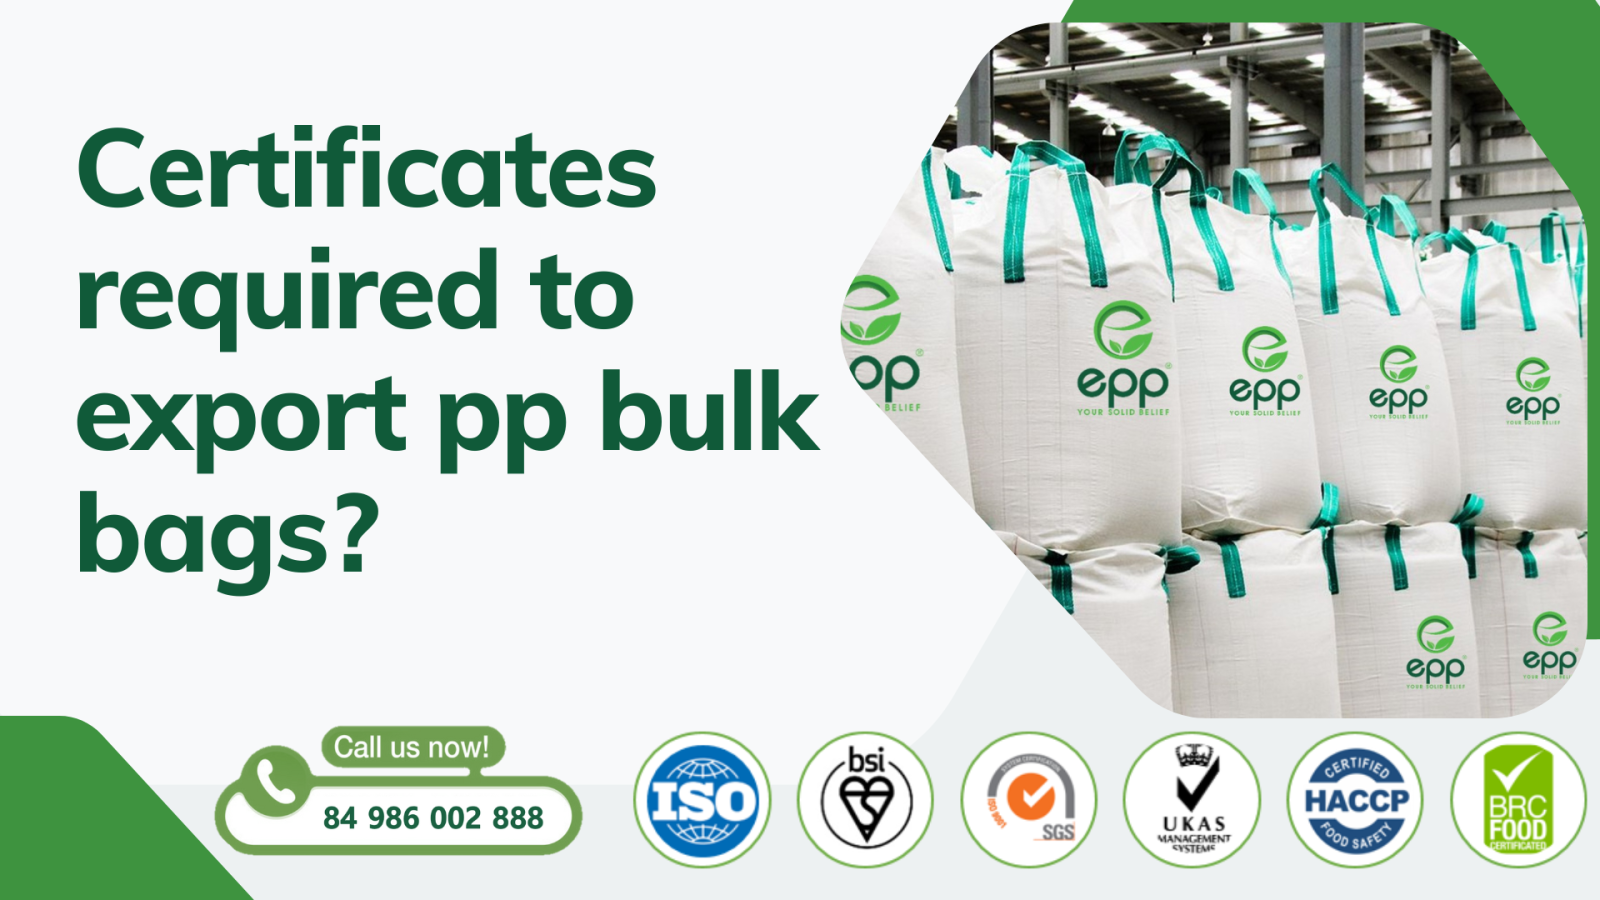 Certificates-required-to-export-pp-bulk-bags.png